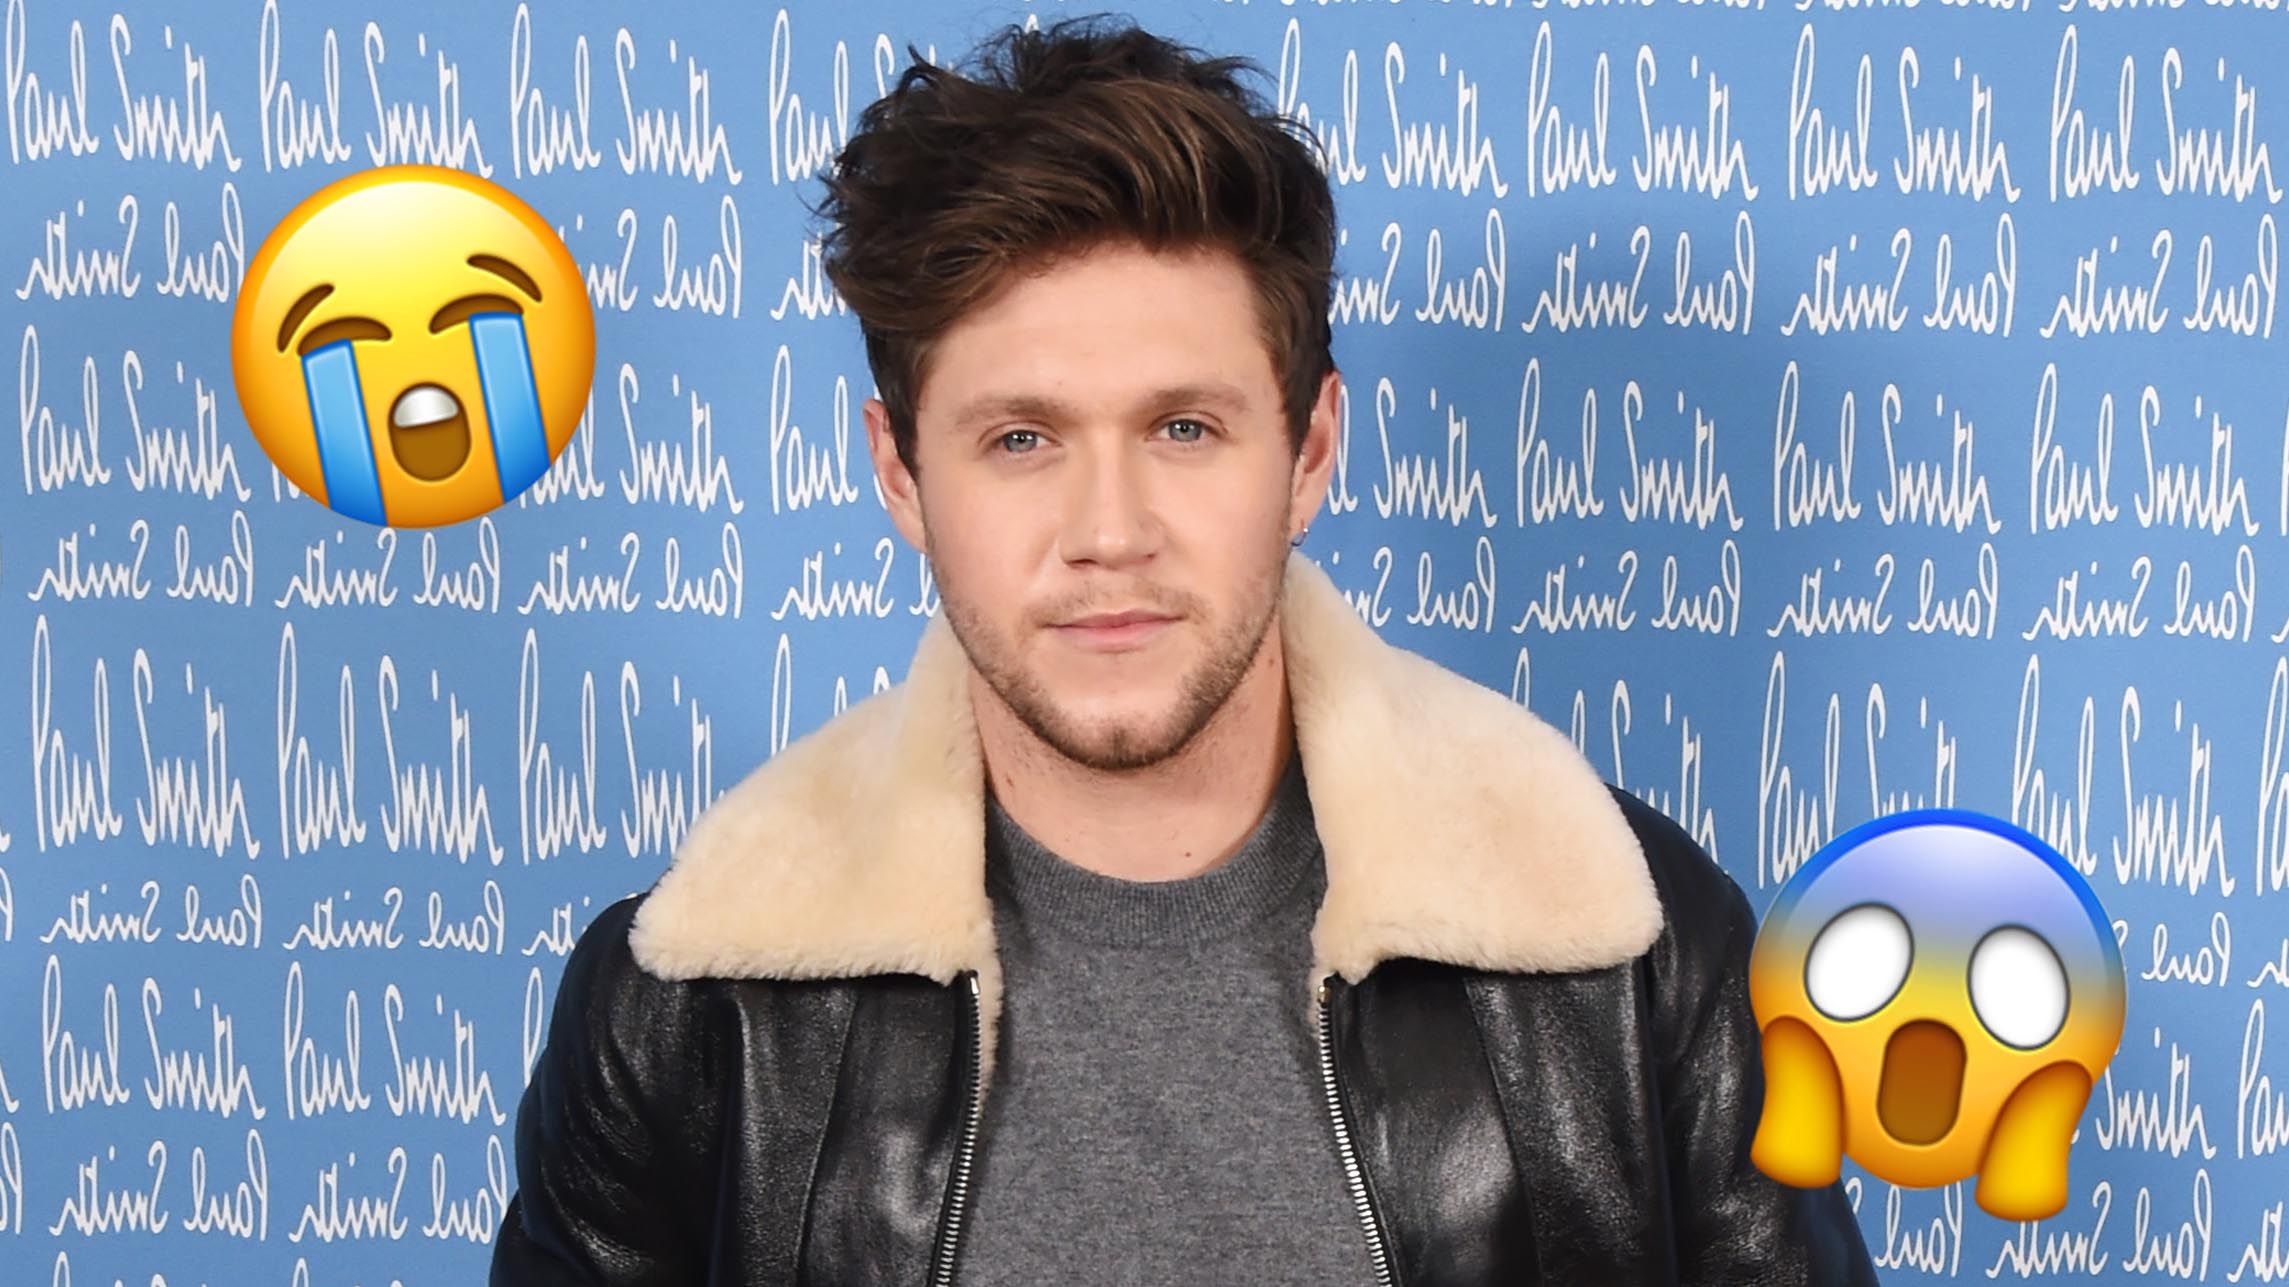 Niall Horan reveals he's 'snapped ligaments' in foot in gruesome photo